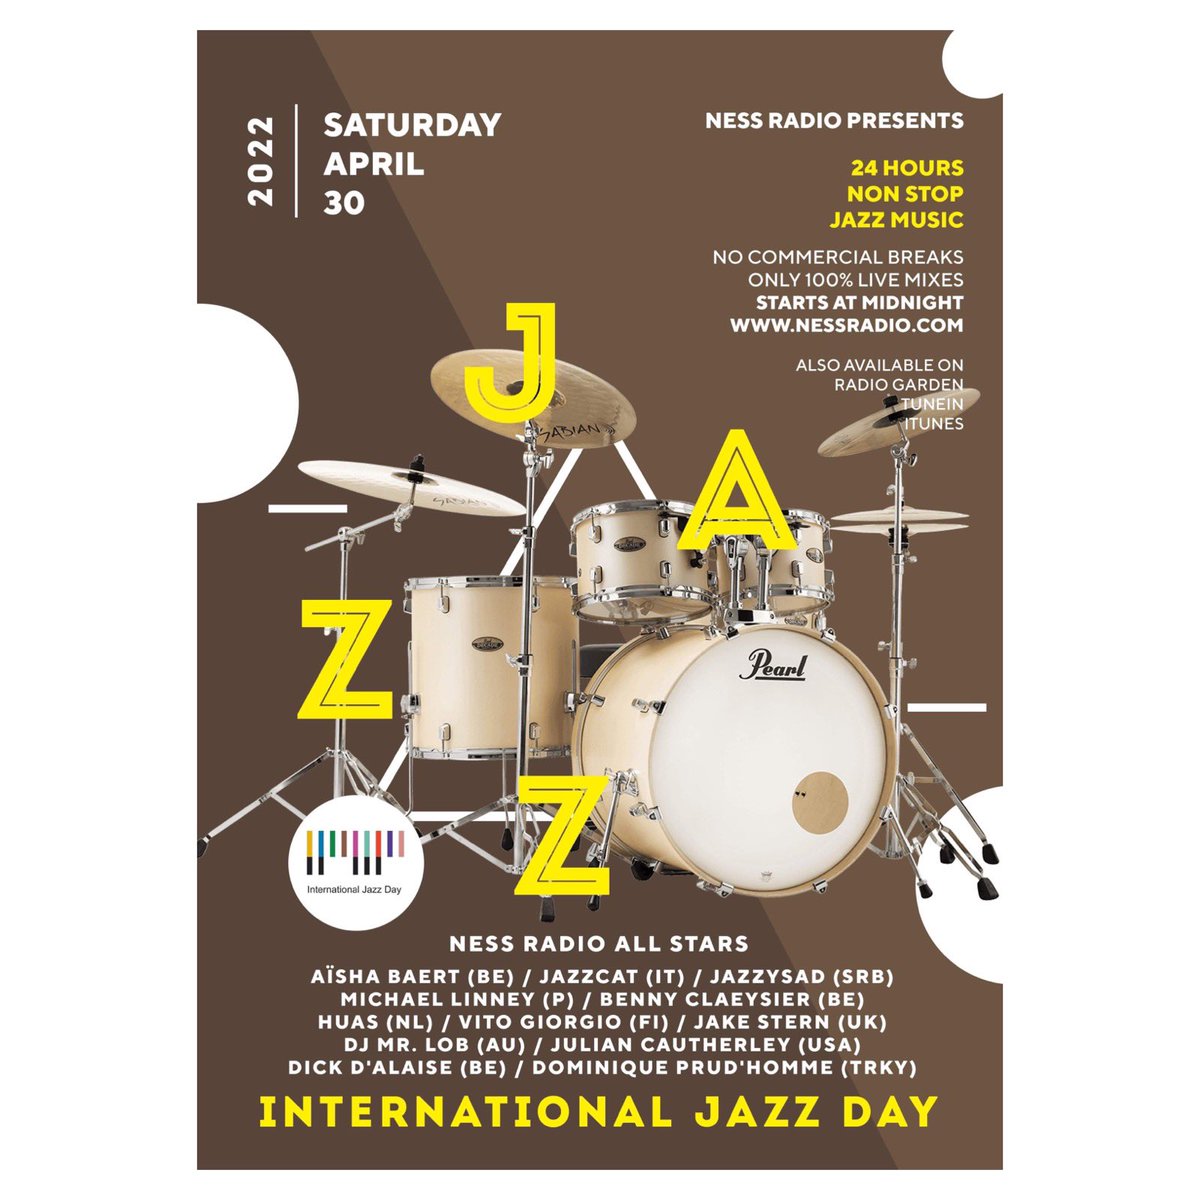 It’s time for the annual #InternationalJazzDay 24 hour broadcast on @NessRadio. Kicks off in under an hour. Come listen to myself and a bunch of fab DJs from across the globe. Doing a 1hr #SunRa set at 9p PT Fri (tonight) and #JazzWaltz set at 10a PT Sat. Props to @Dubbeldie